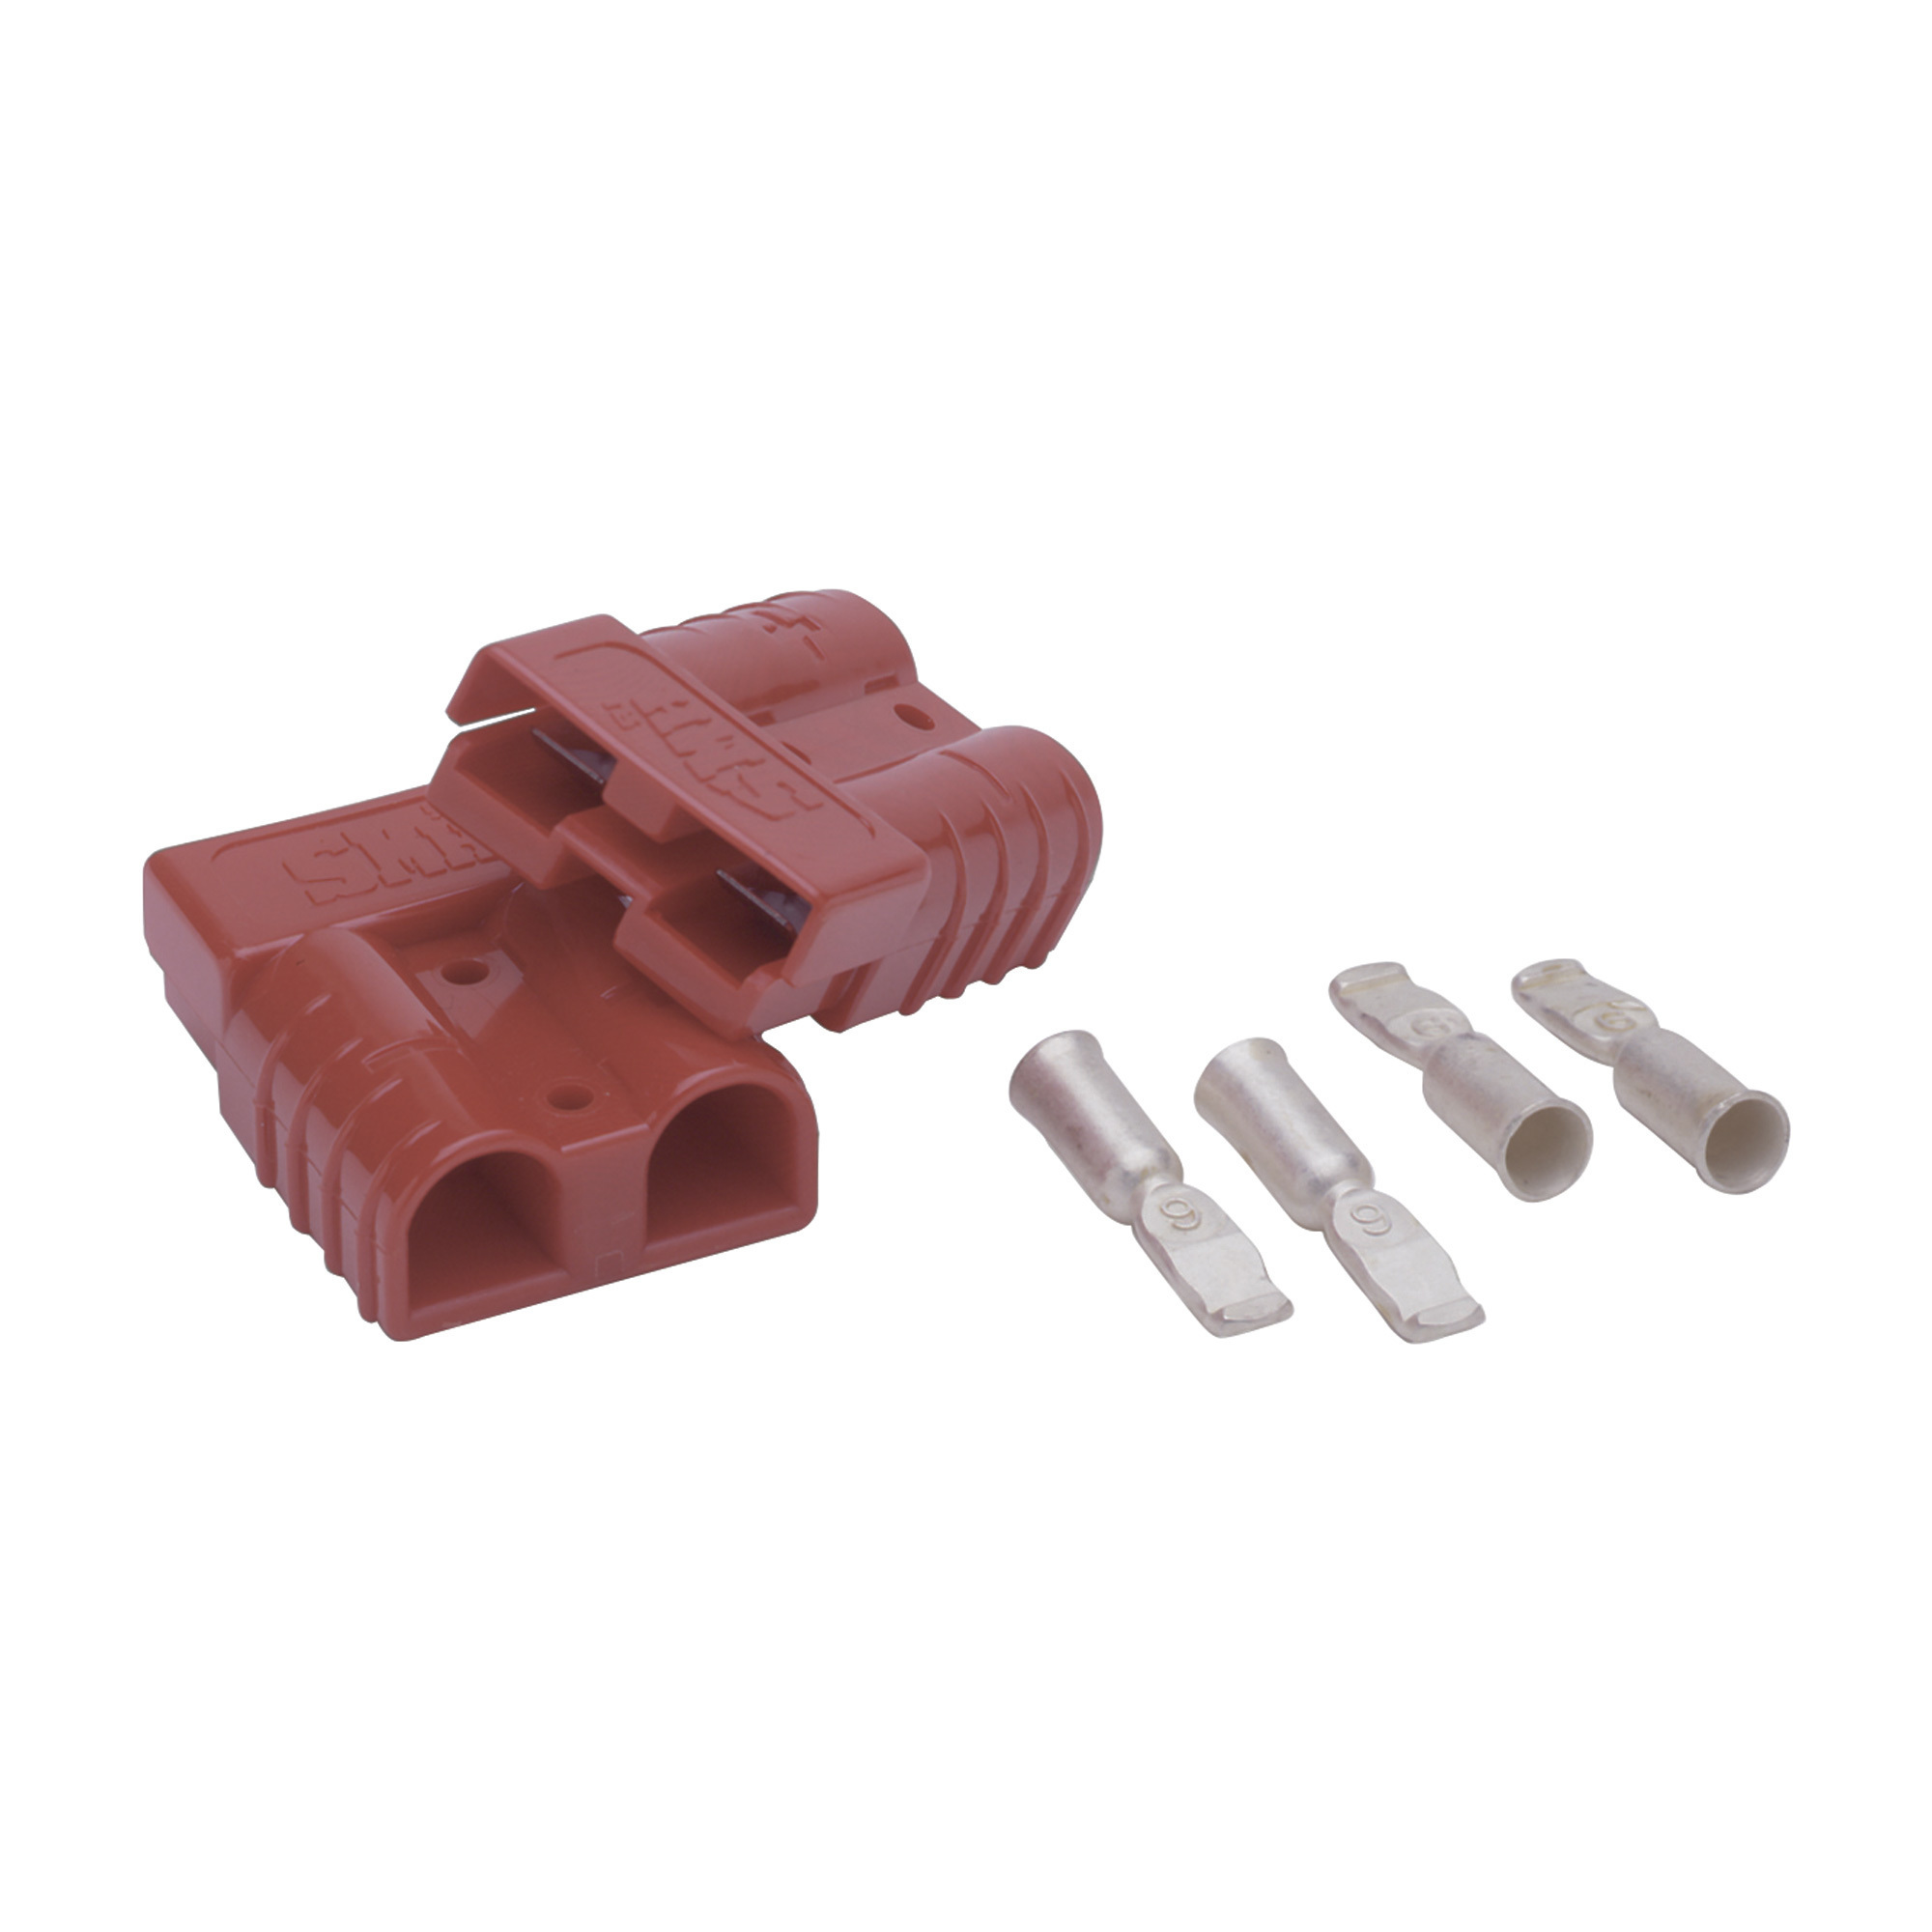 WARN Winch Quick Connect Plugs, Model 22680